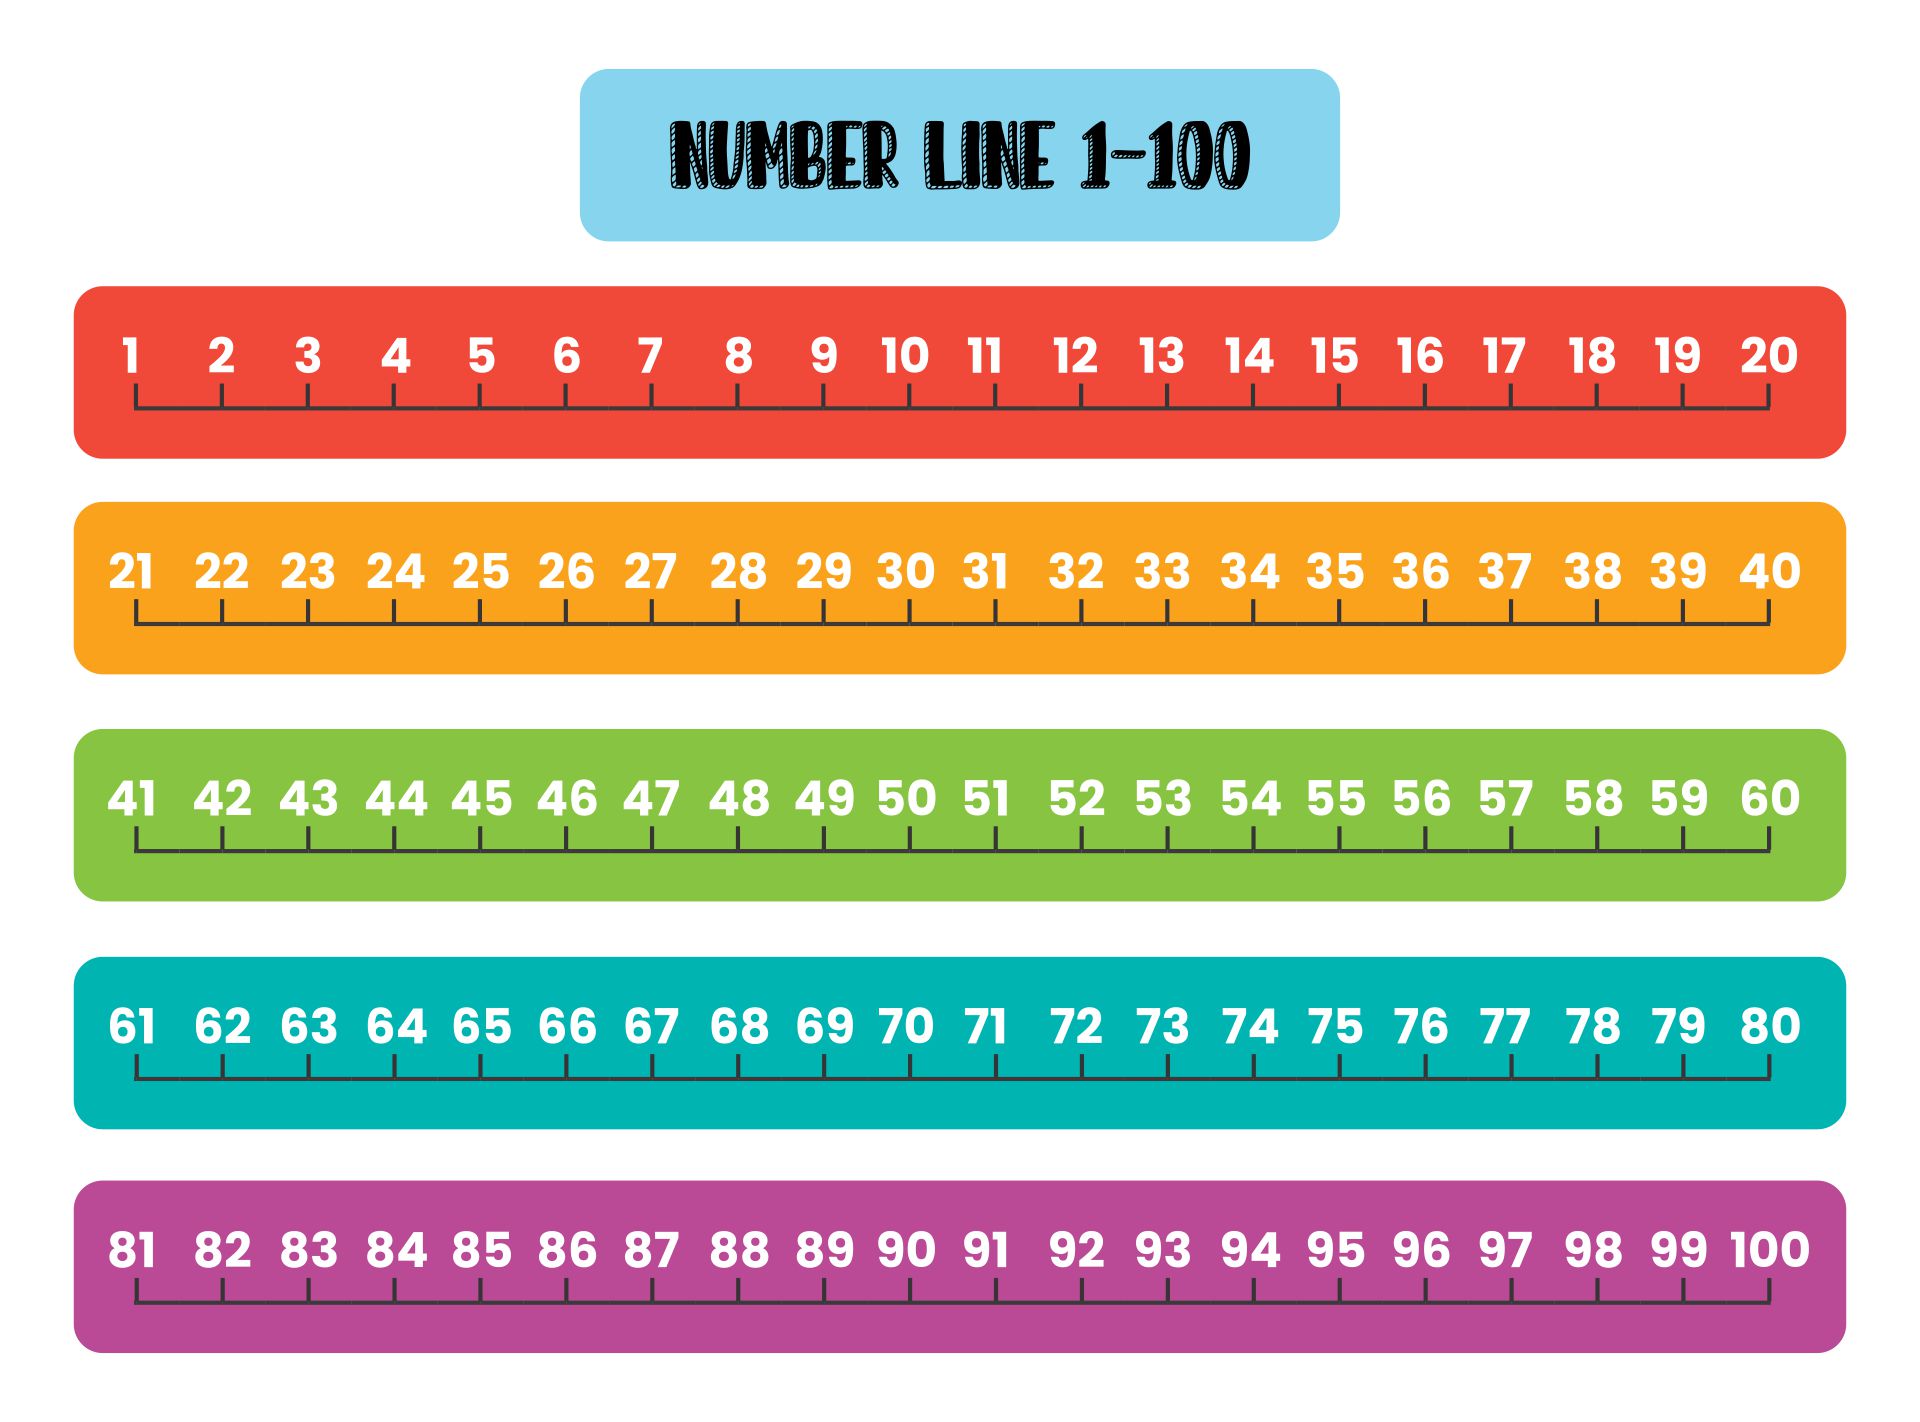 Number Line To 100 Counting By 1 Printable Number Line 1 100 By Fallon Wagner Teachers Pay 